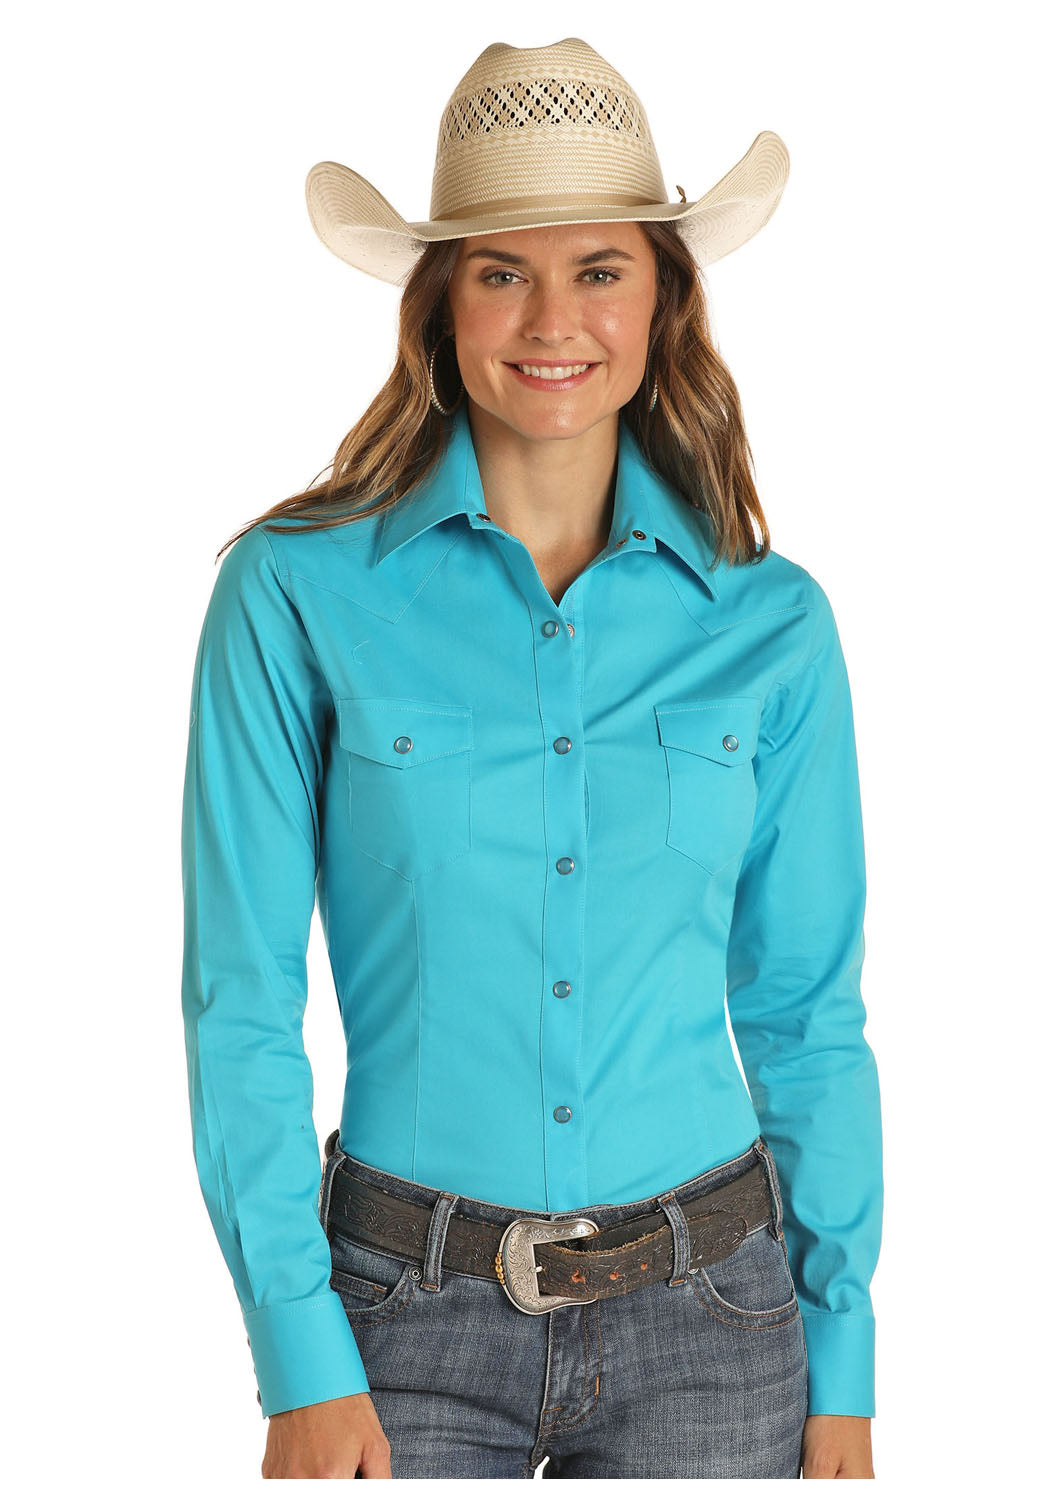 Panhandle Long Sleeved Shirt - Turquoise (22S8041)